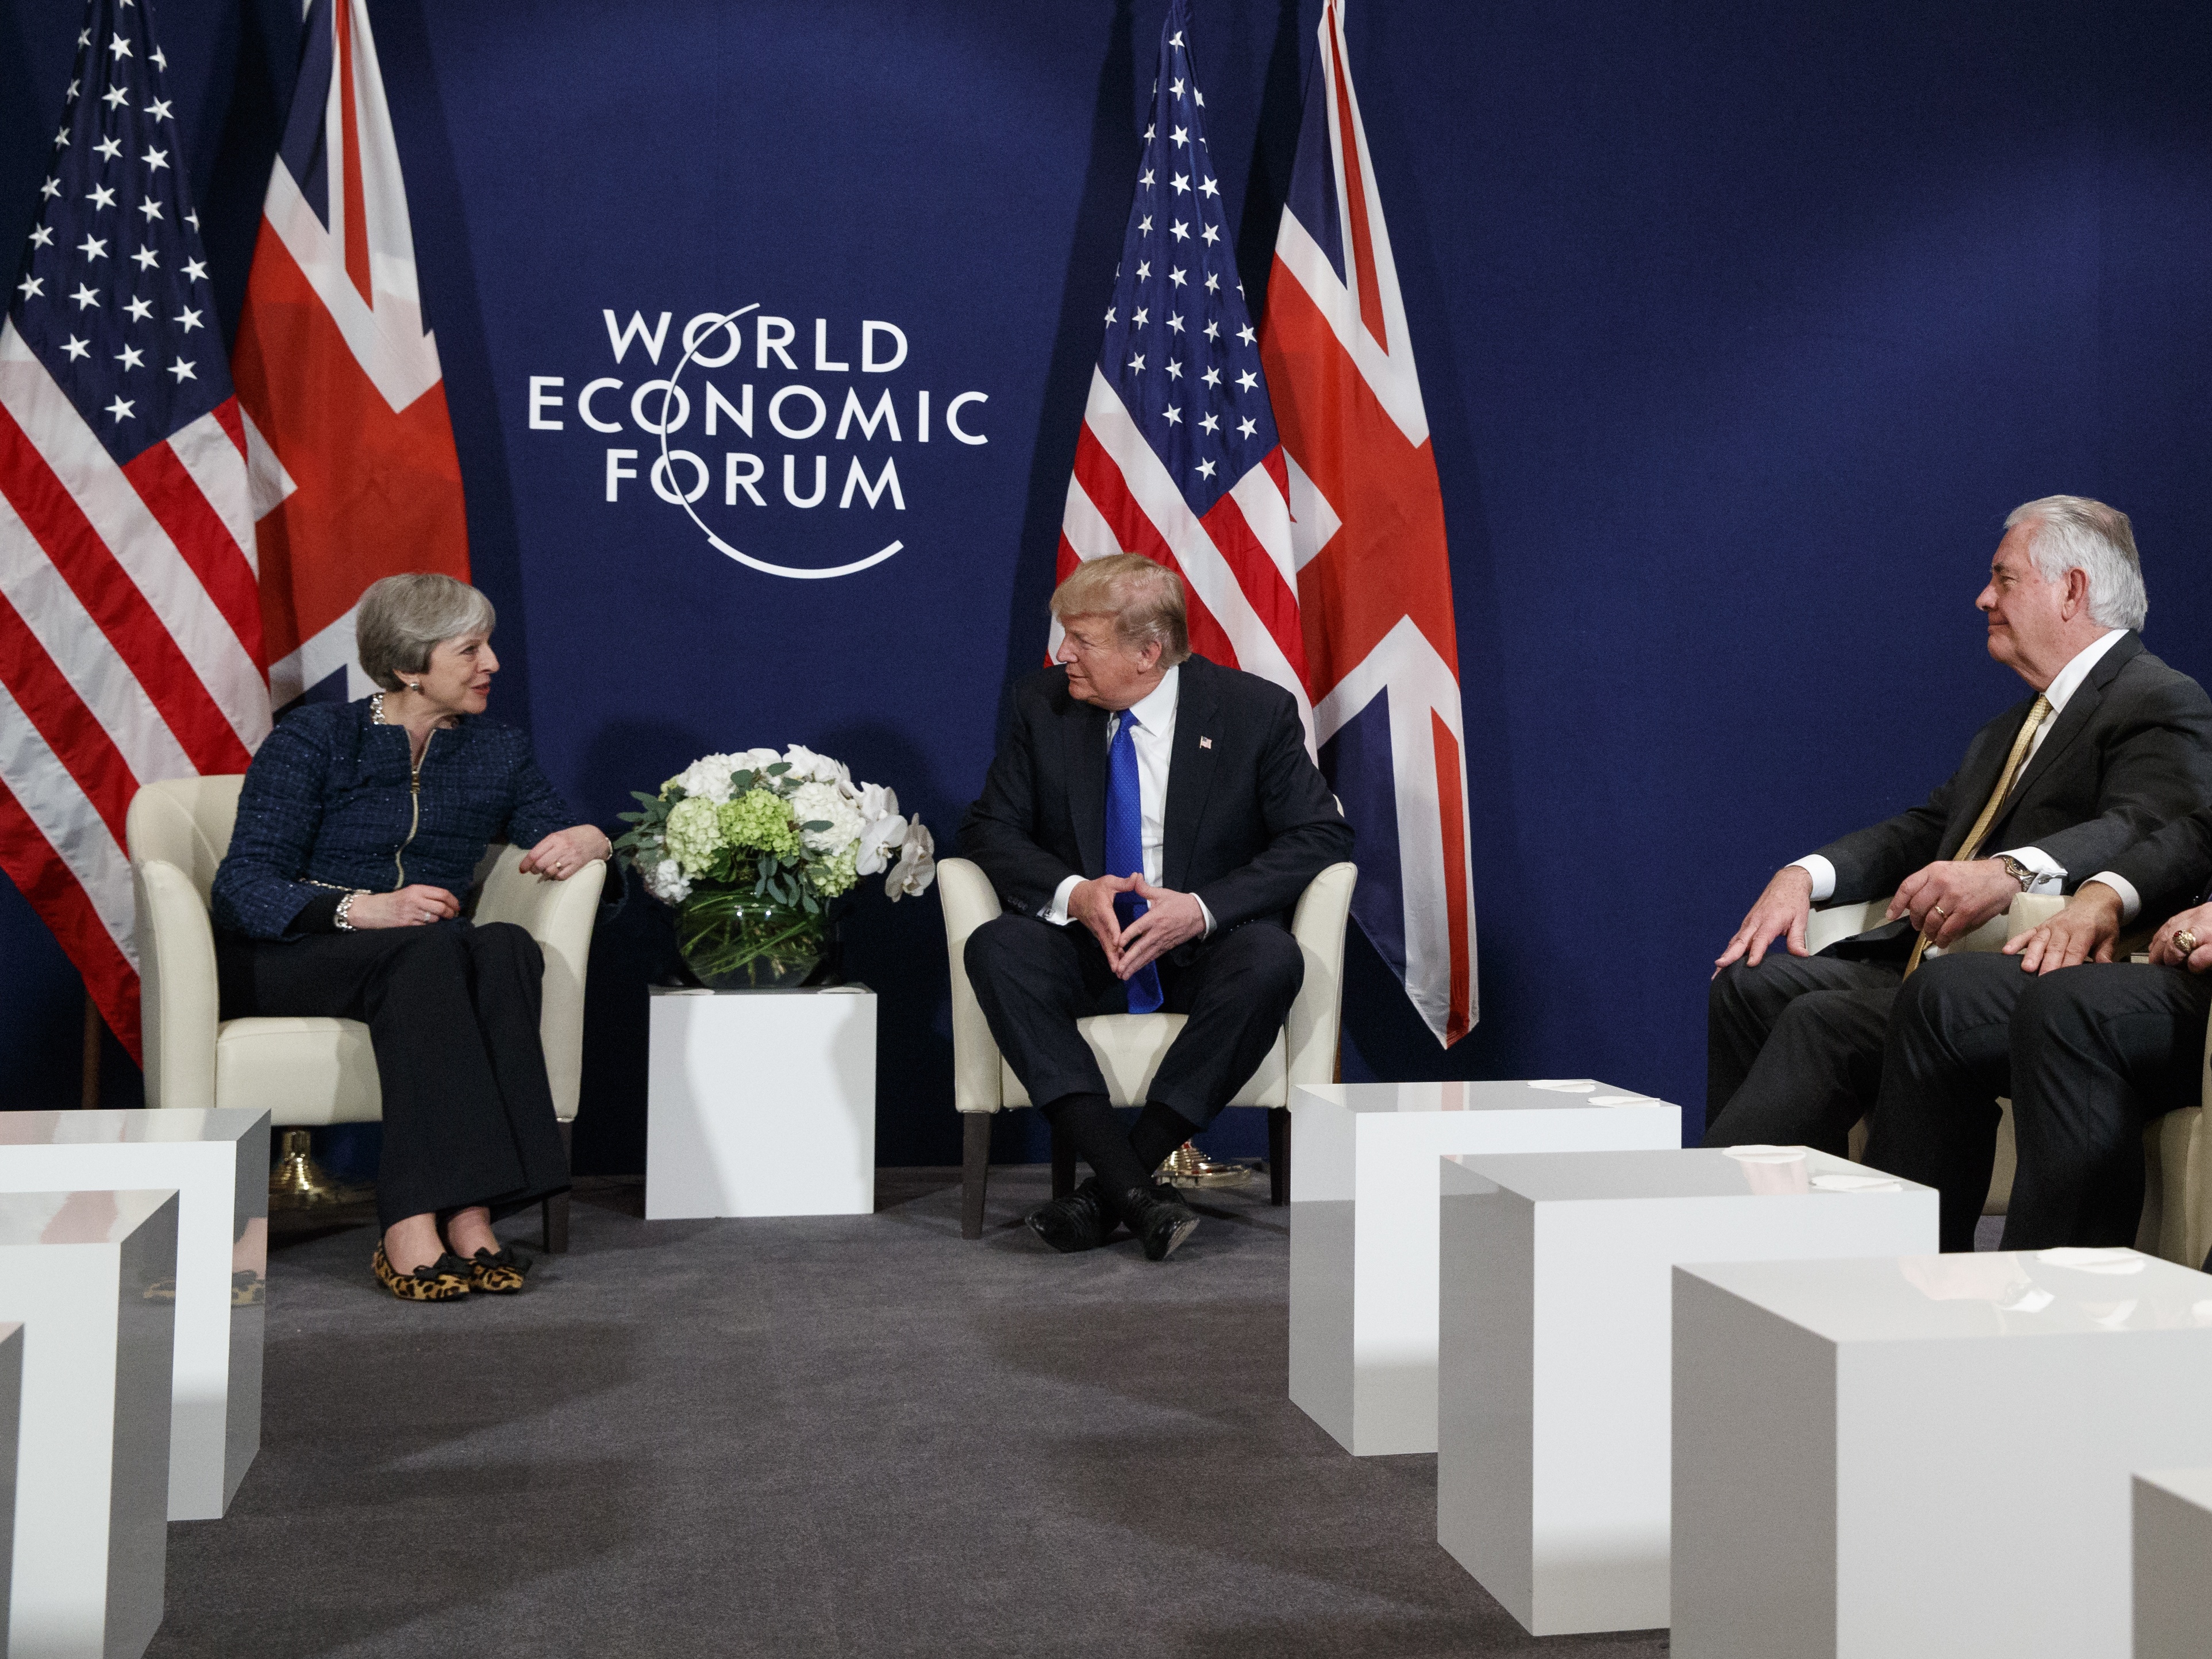 Davos provides the location for the latest meeting between Donald Trump and Theresa May (Evan Vucci/AP)